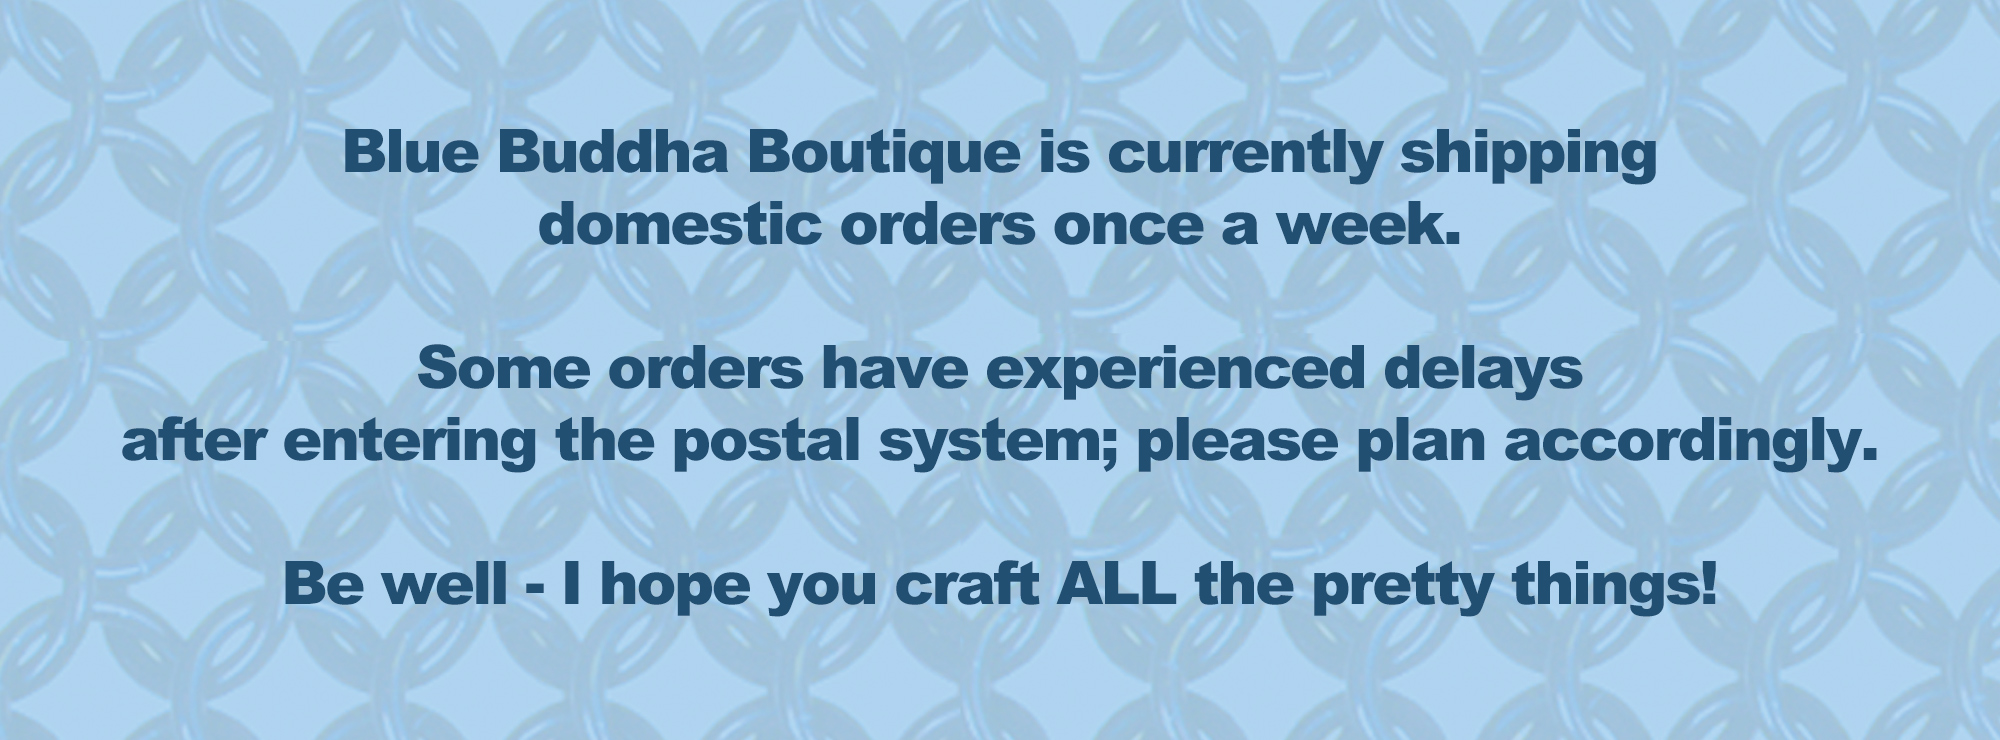 text reads that Blue Buddha is shipping domestic orders once a week and there may be delays with the postal system